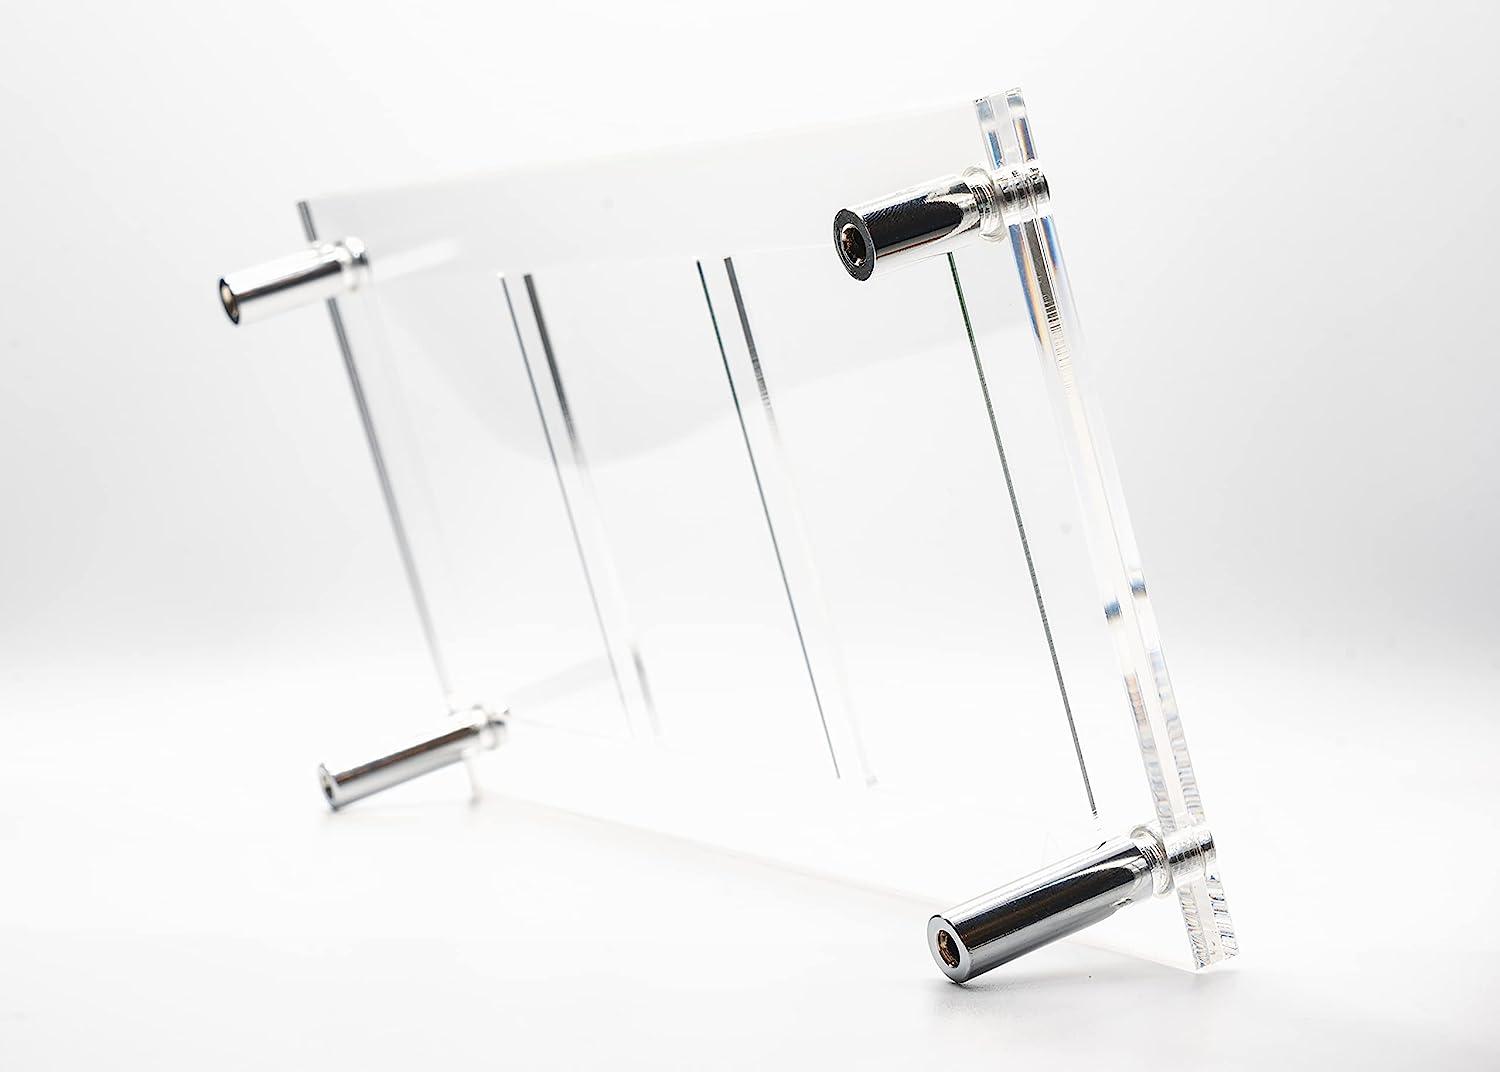 Trading Card Frame Holder Stand Display - 3 Card Slots Clear Acrylic UV  Filtering Screwdown